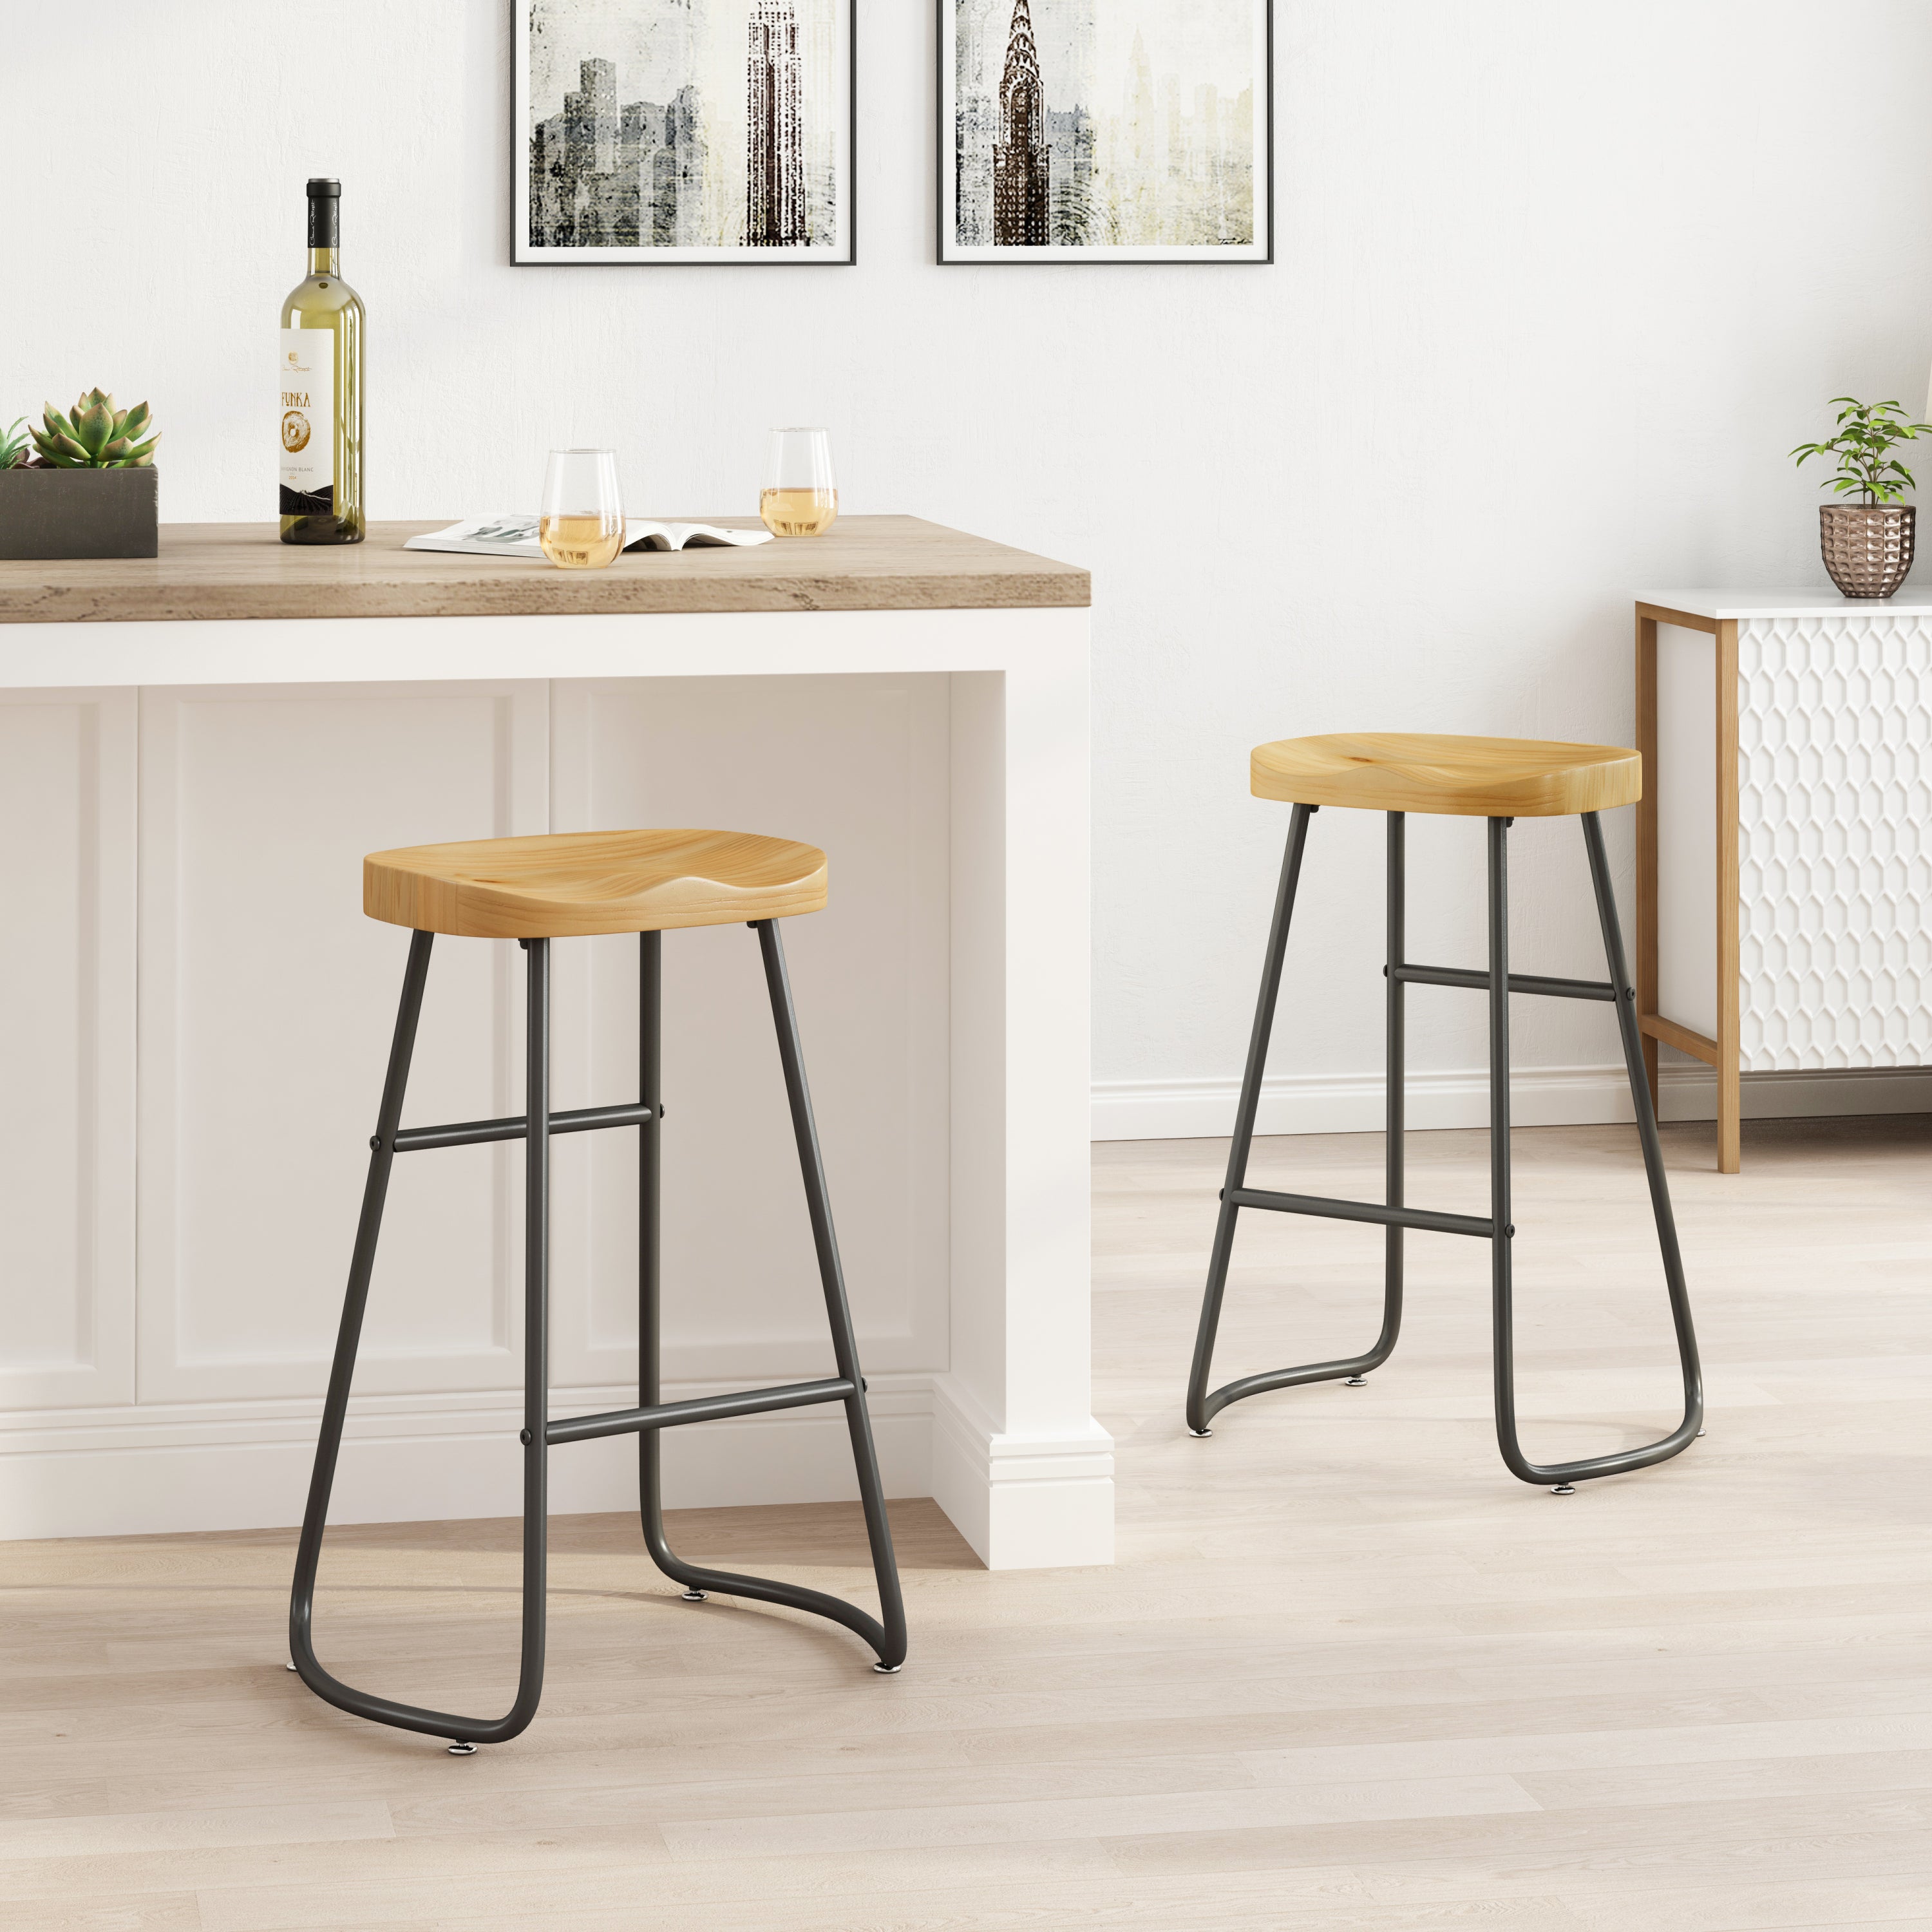 29.52" Stylish and Minimalist Bar Stools Set of 2, Counter Height Bar Stools, for Kitchen Island, Coffee Shop, Bar, Home Balcony, Wood Color